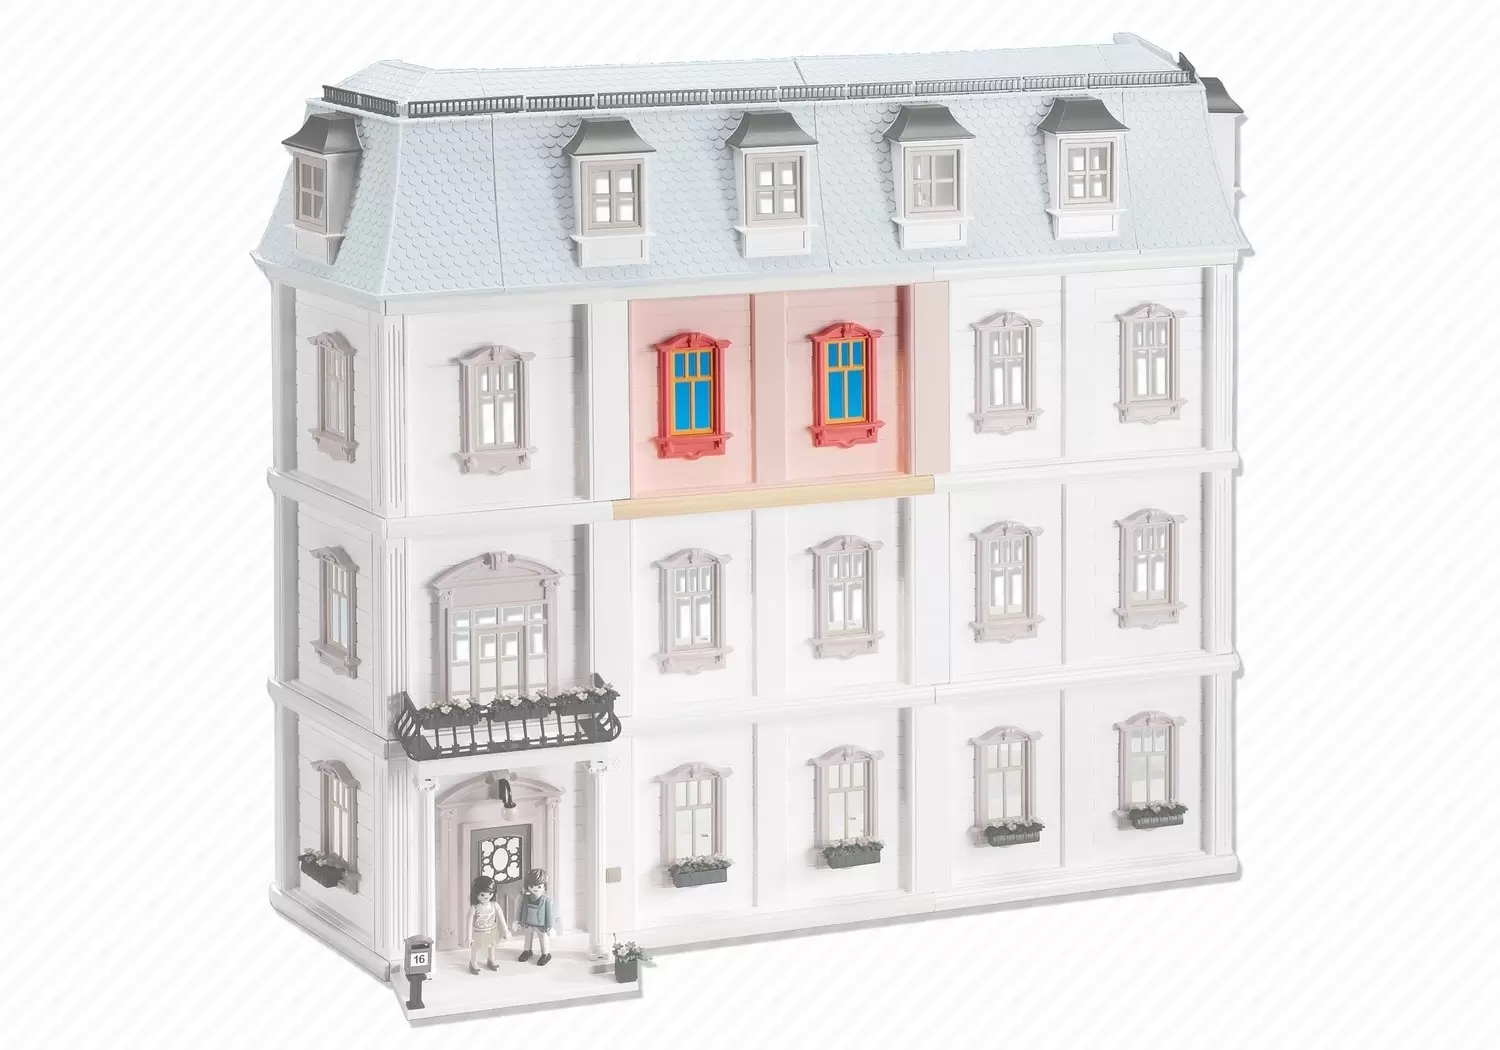 Playmobil Accessories & decorations - Floor Extension for Deluxe Dollhouse (5303)